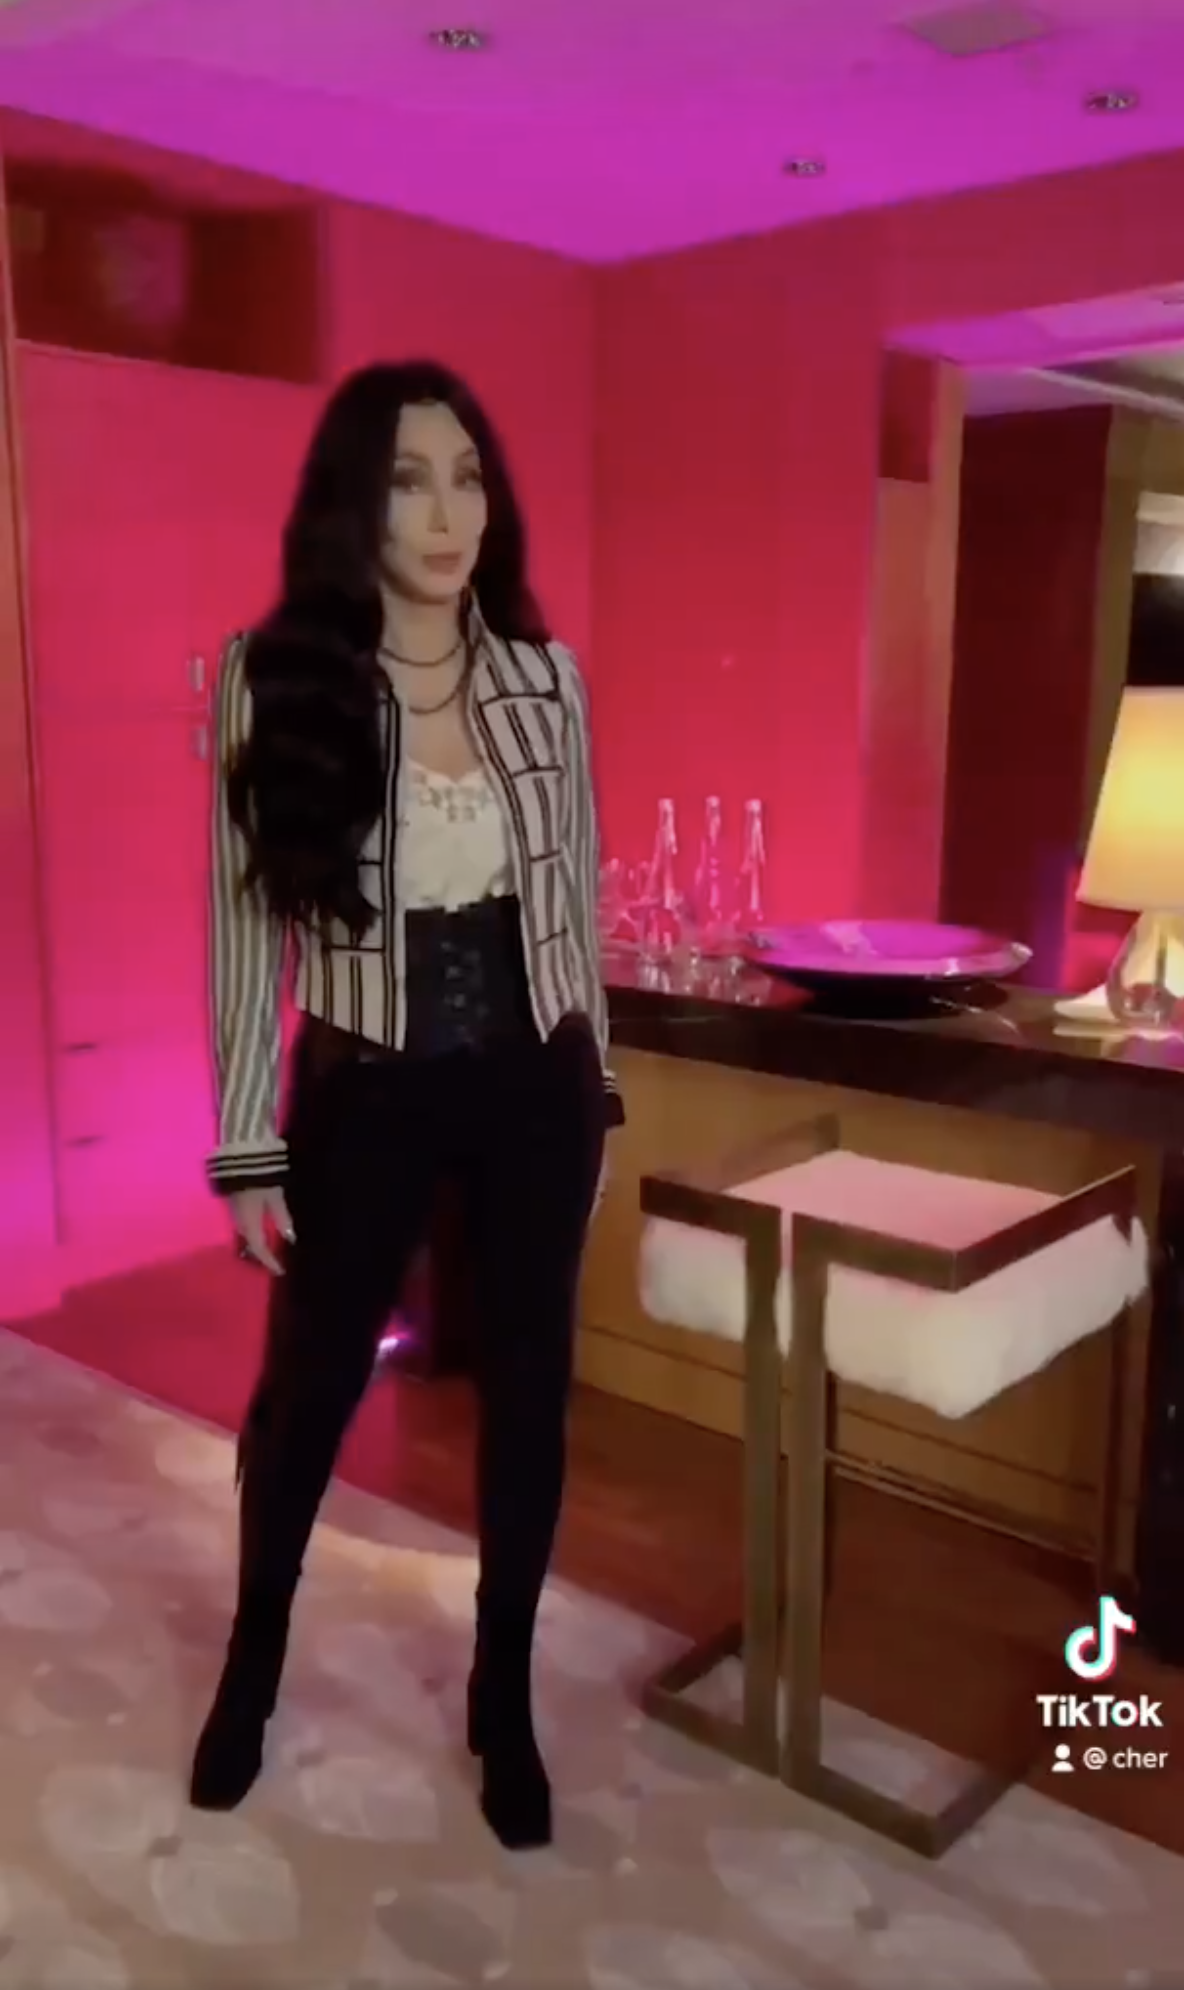 Cher appears as a brunette in her first TikTok video